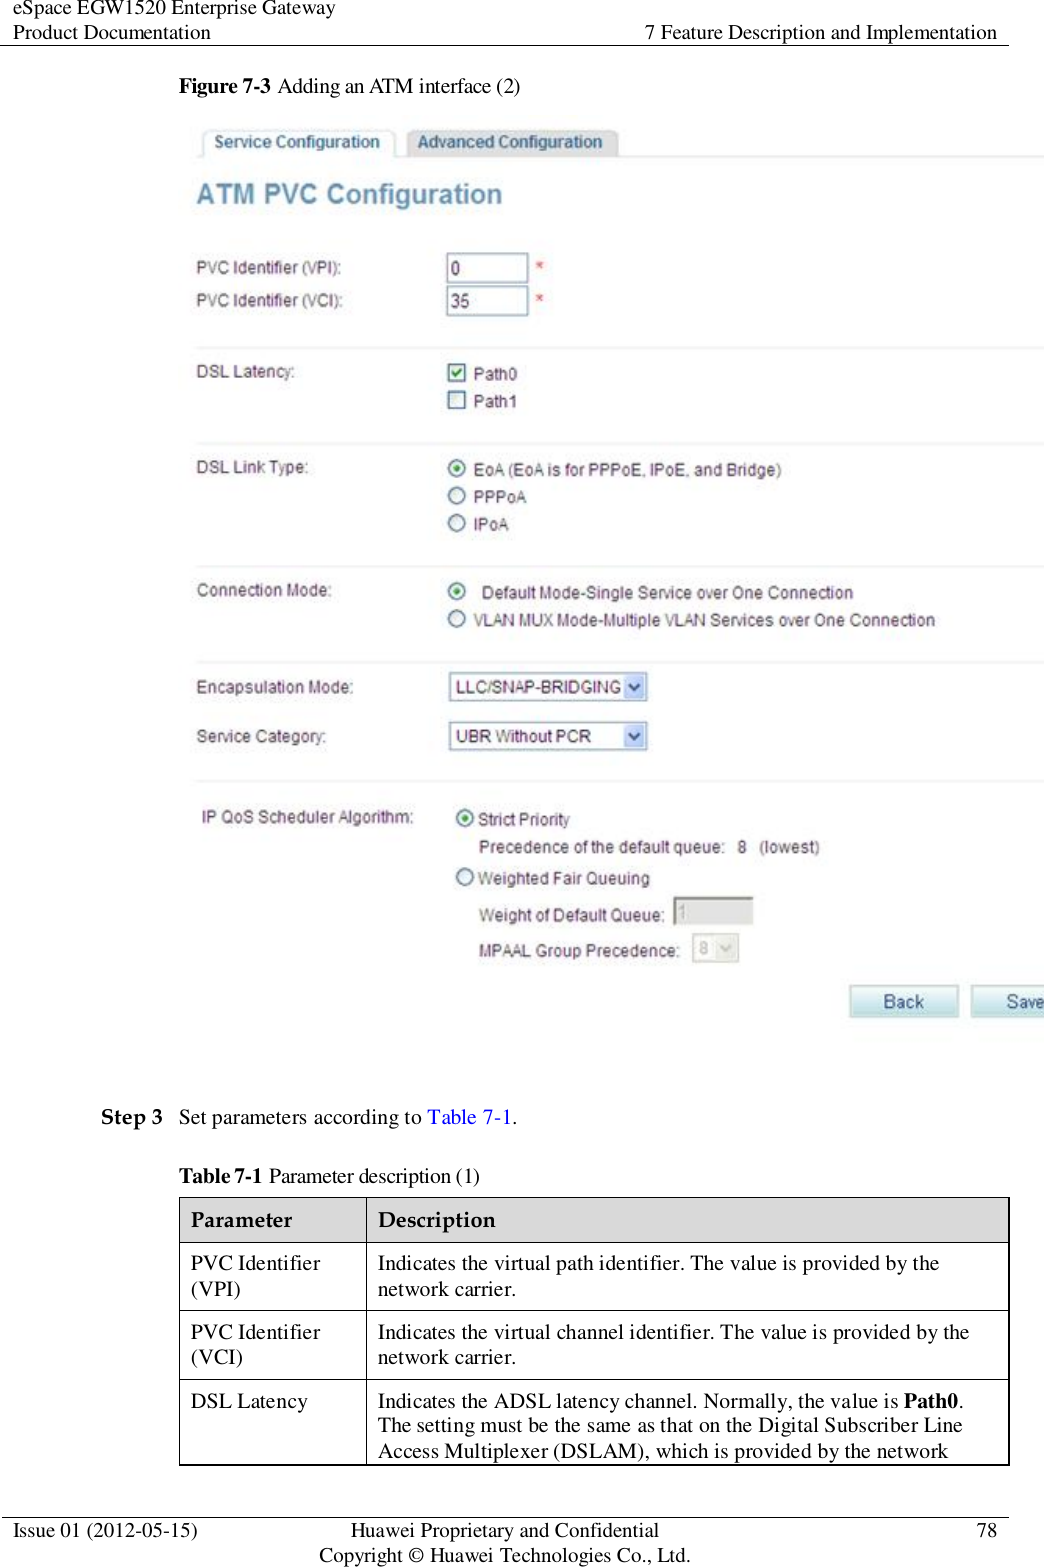 eSpace EGW1520 Enterprise Gateway Product Documentation 7 Feature Description and Implementation  Issue 01 (2012-05-15) Huawei Proprietary and Confidential                                     Copyright © Huawei Technologies Co., Ltd. 78  Figure 7-3 Adding an ATM interface (2)   Step 3 Set parameters according to Table 7-1. Table 7-1 Parameter description (1) Parameter Description PVC Identifier (VPI) Indicates the virtual path identifier. The value is provided by the network carrier. PVC Identifier (VCI) Indicates the virtual channel identifier. The value is provided by the network carrier. DSL Latency Indicates the ADSL latency channel. Normally, the value is Path0. The setting must be the same as that on the Digital Subscriber Line Access Multiplexer (DSLAM), which is provided by the network 